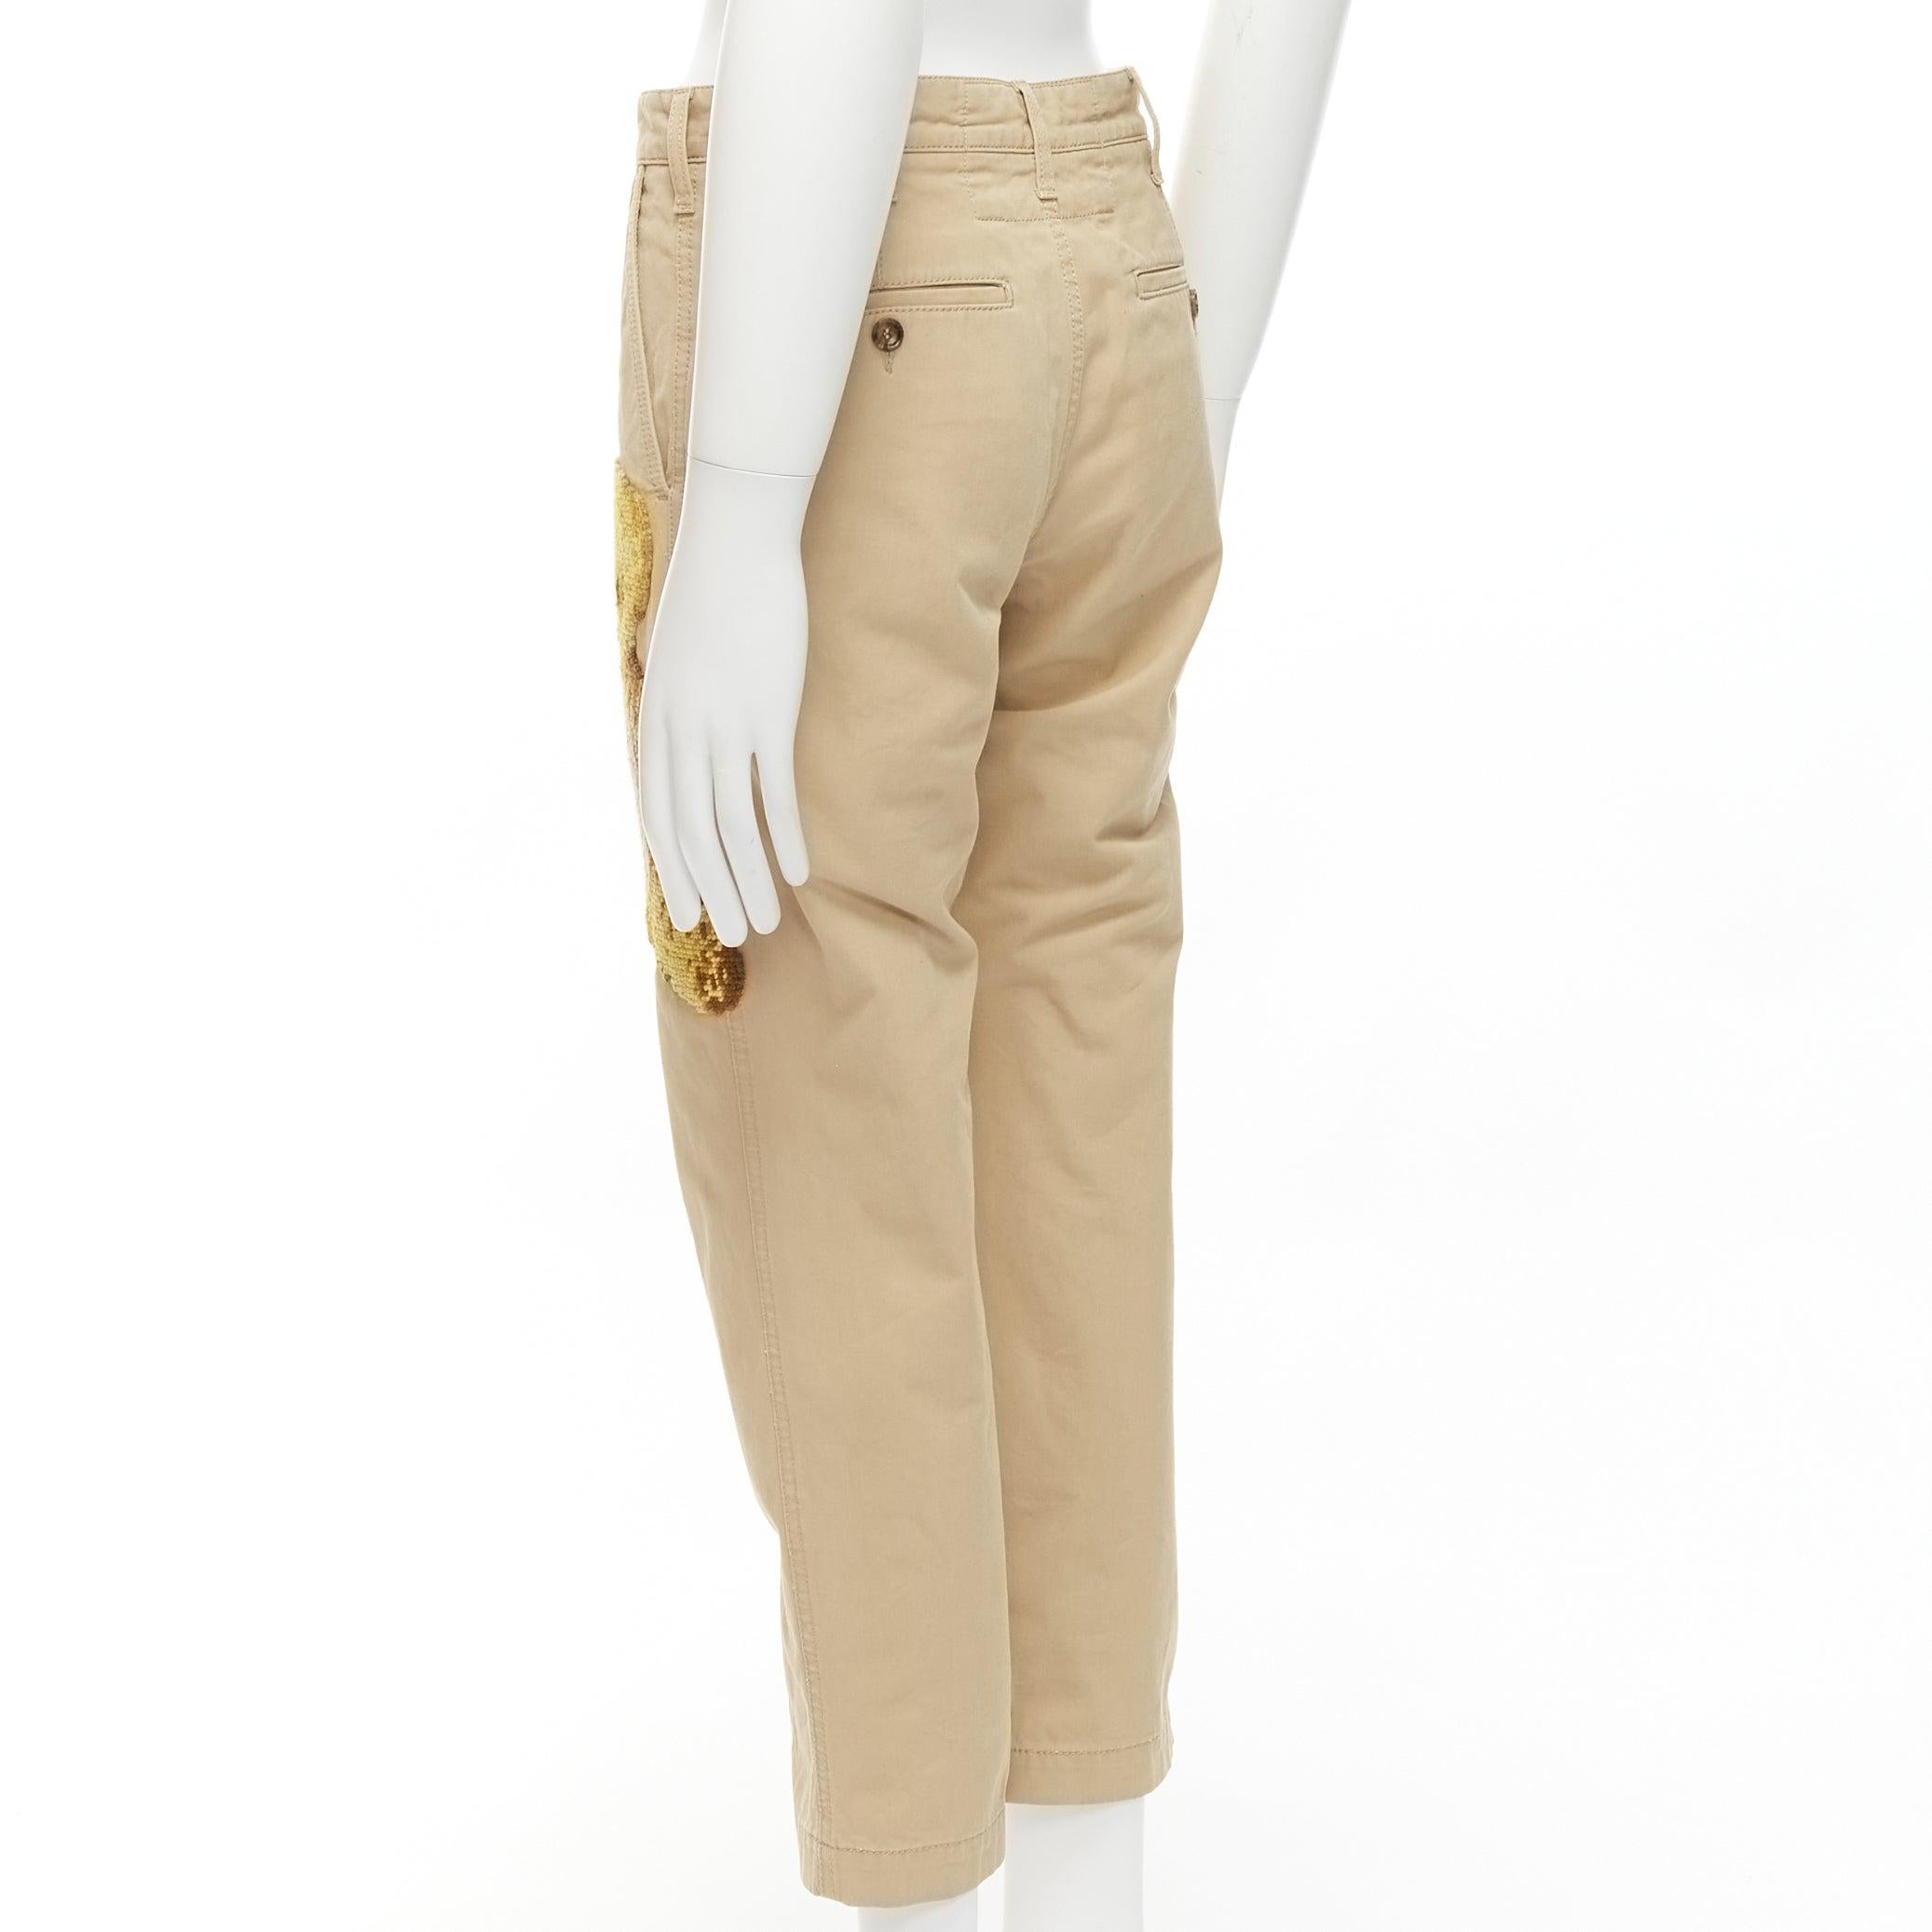 GUCCI Alessandro Michele brown Teddy Bear embroidery beige chino pants 30